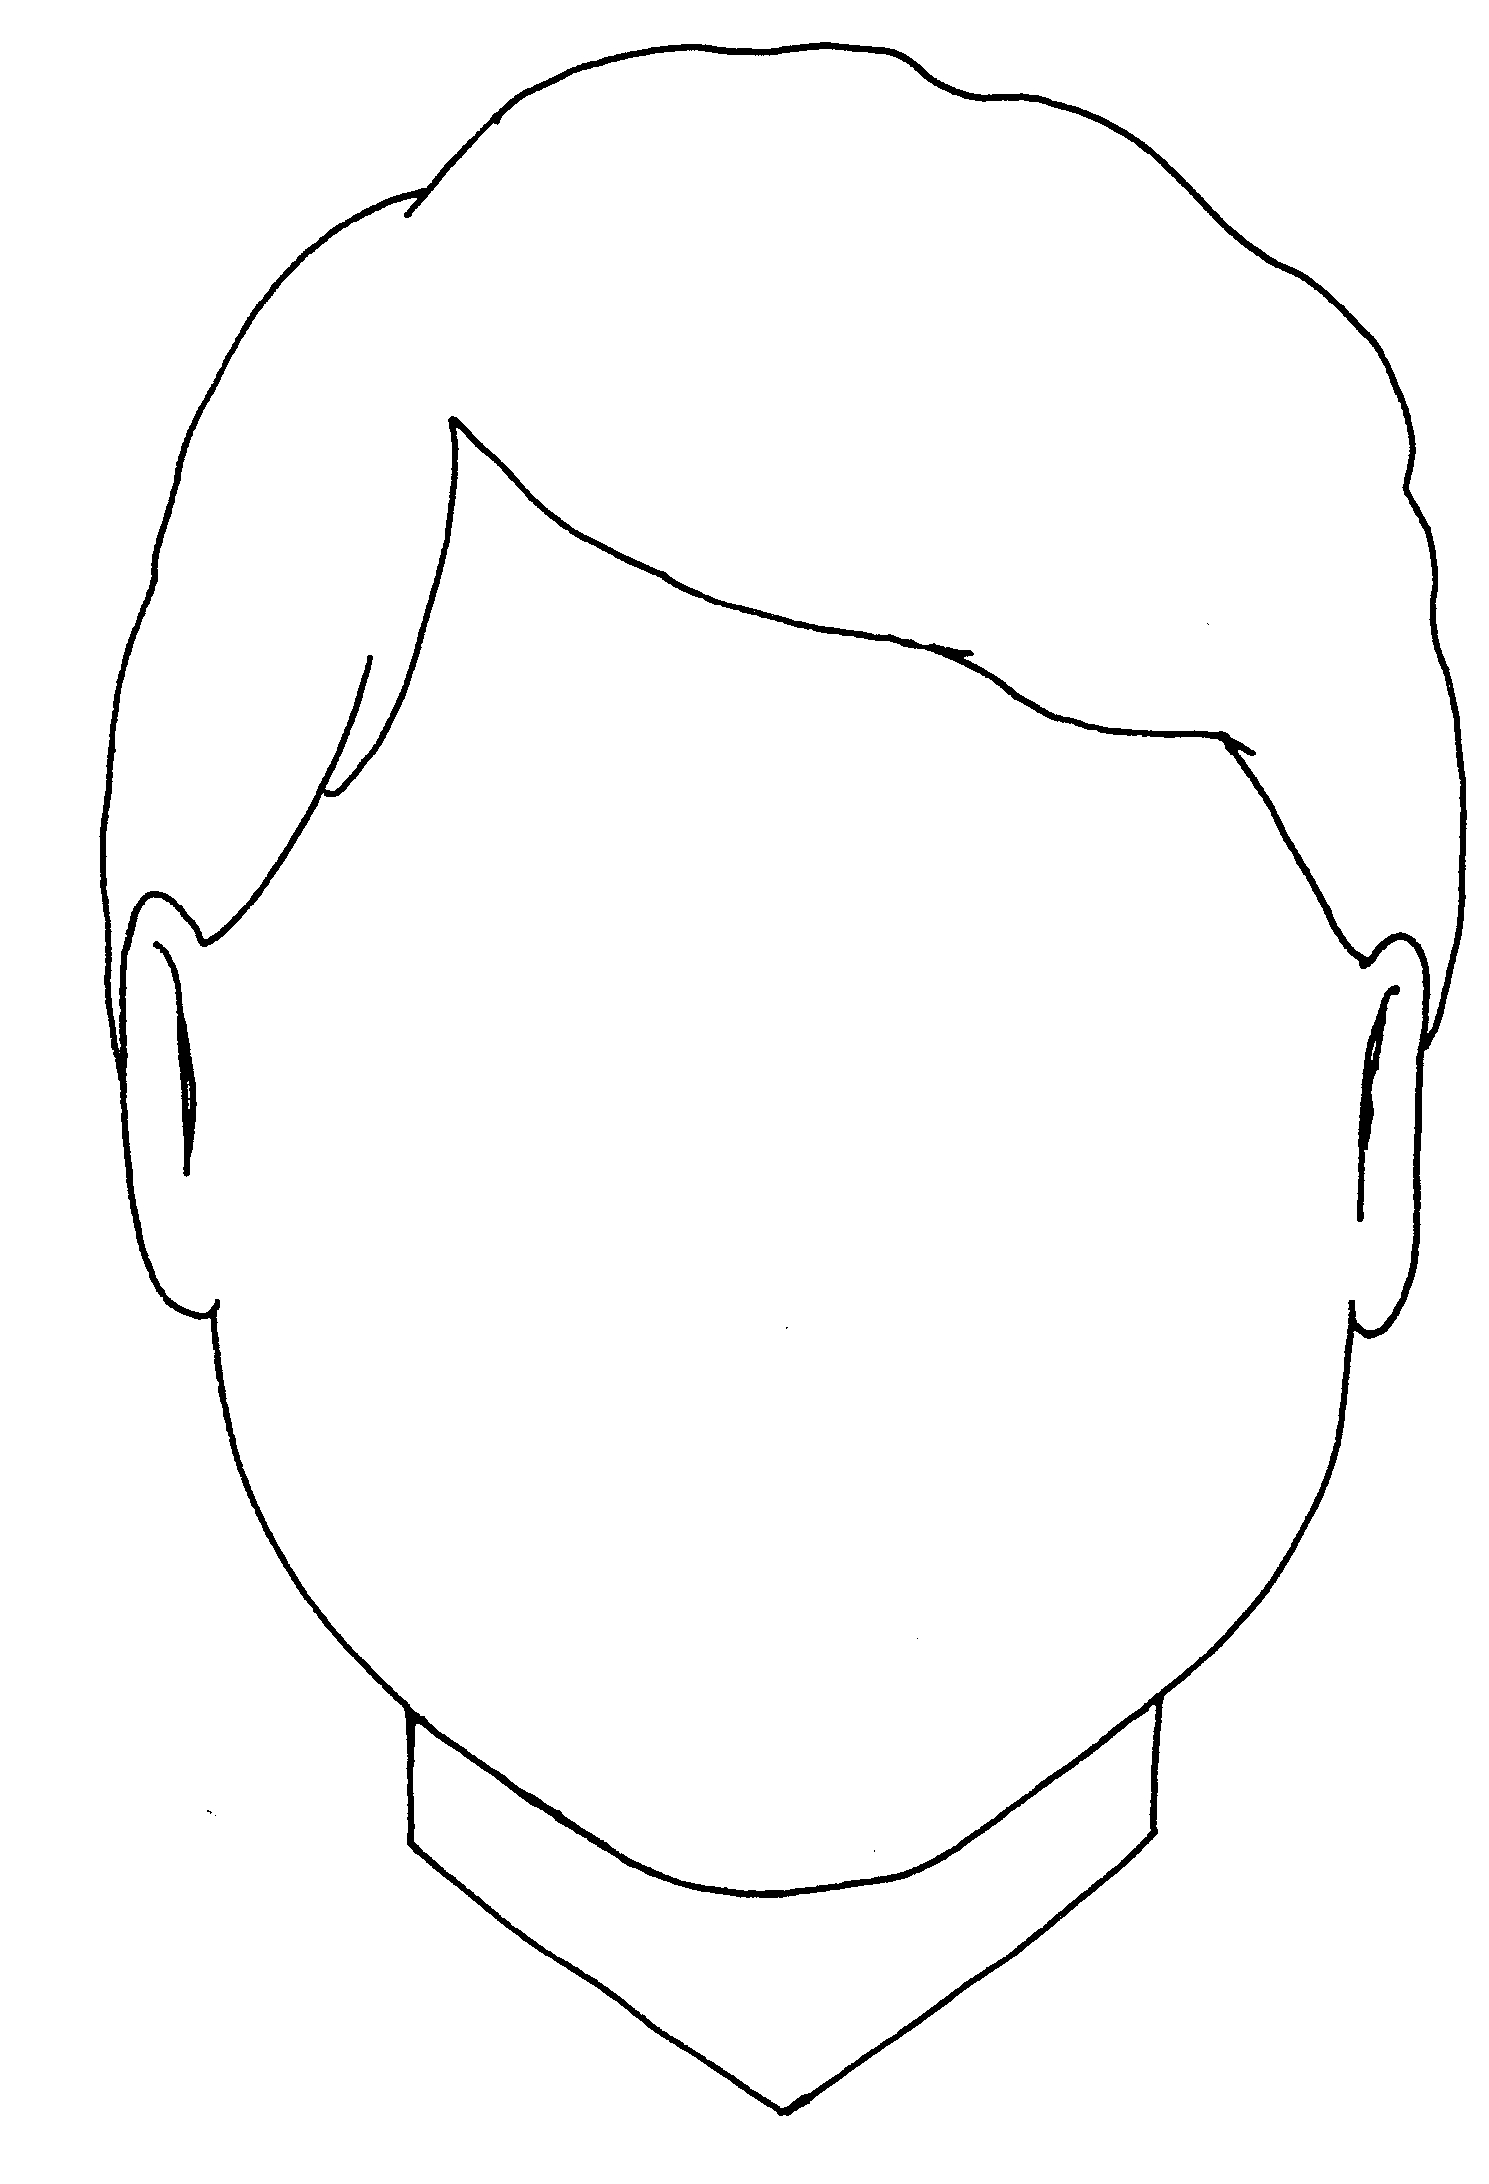 Blank Boy Face Colouring Coloring Pages - Quoteko.